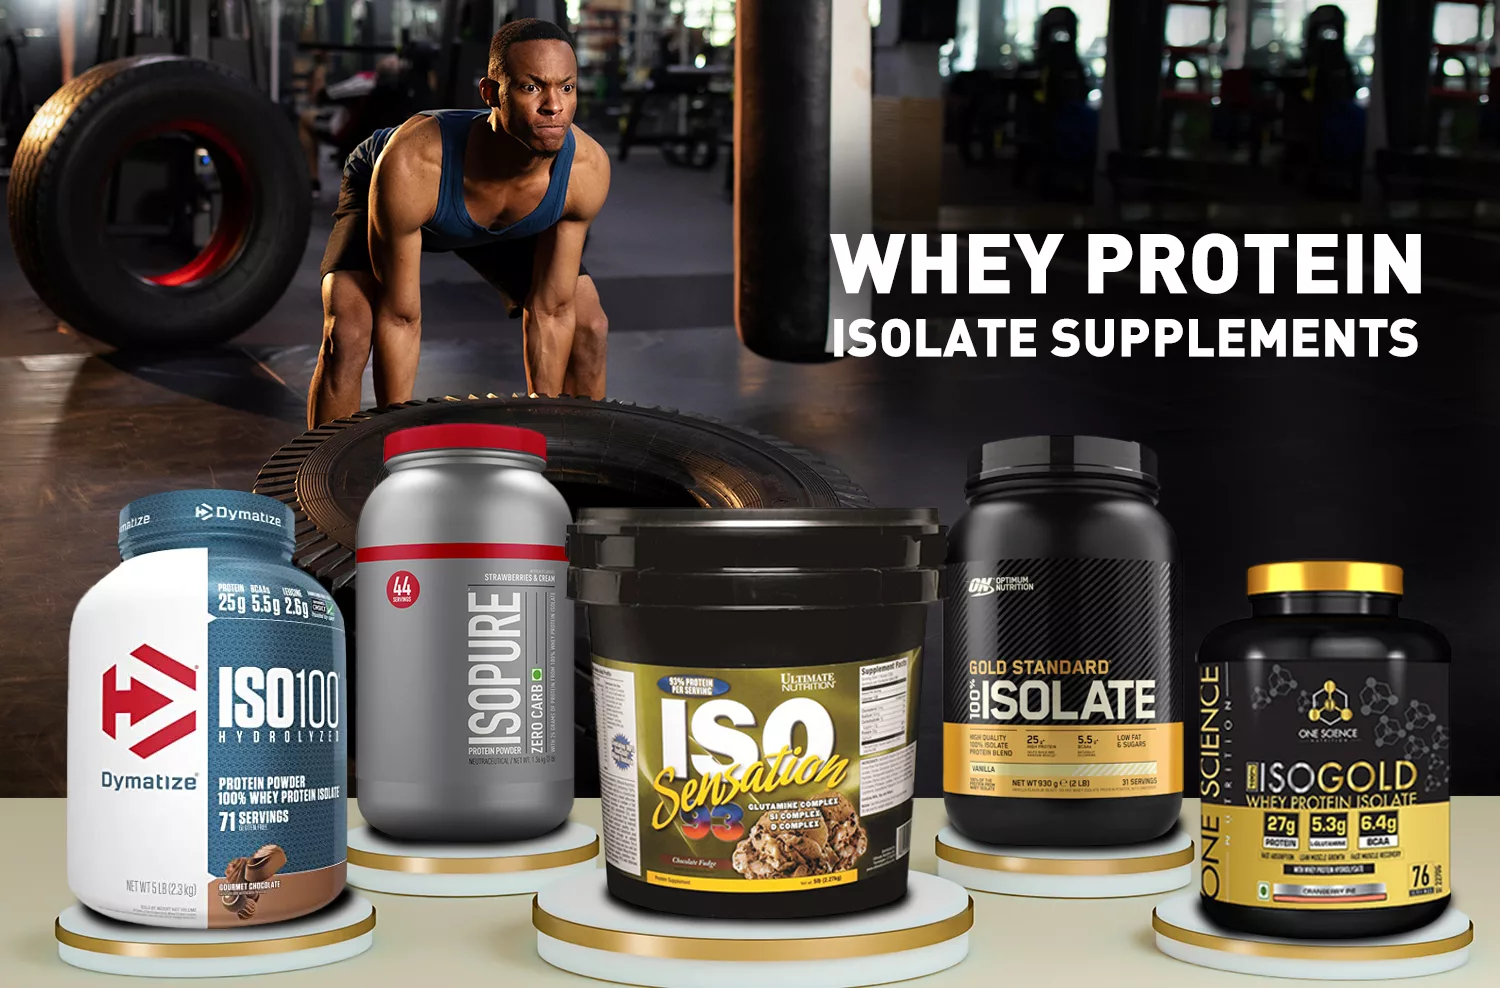 Best Whey Protein Isolate Supplements in India